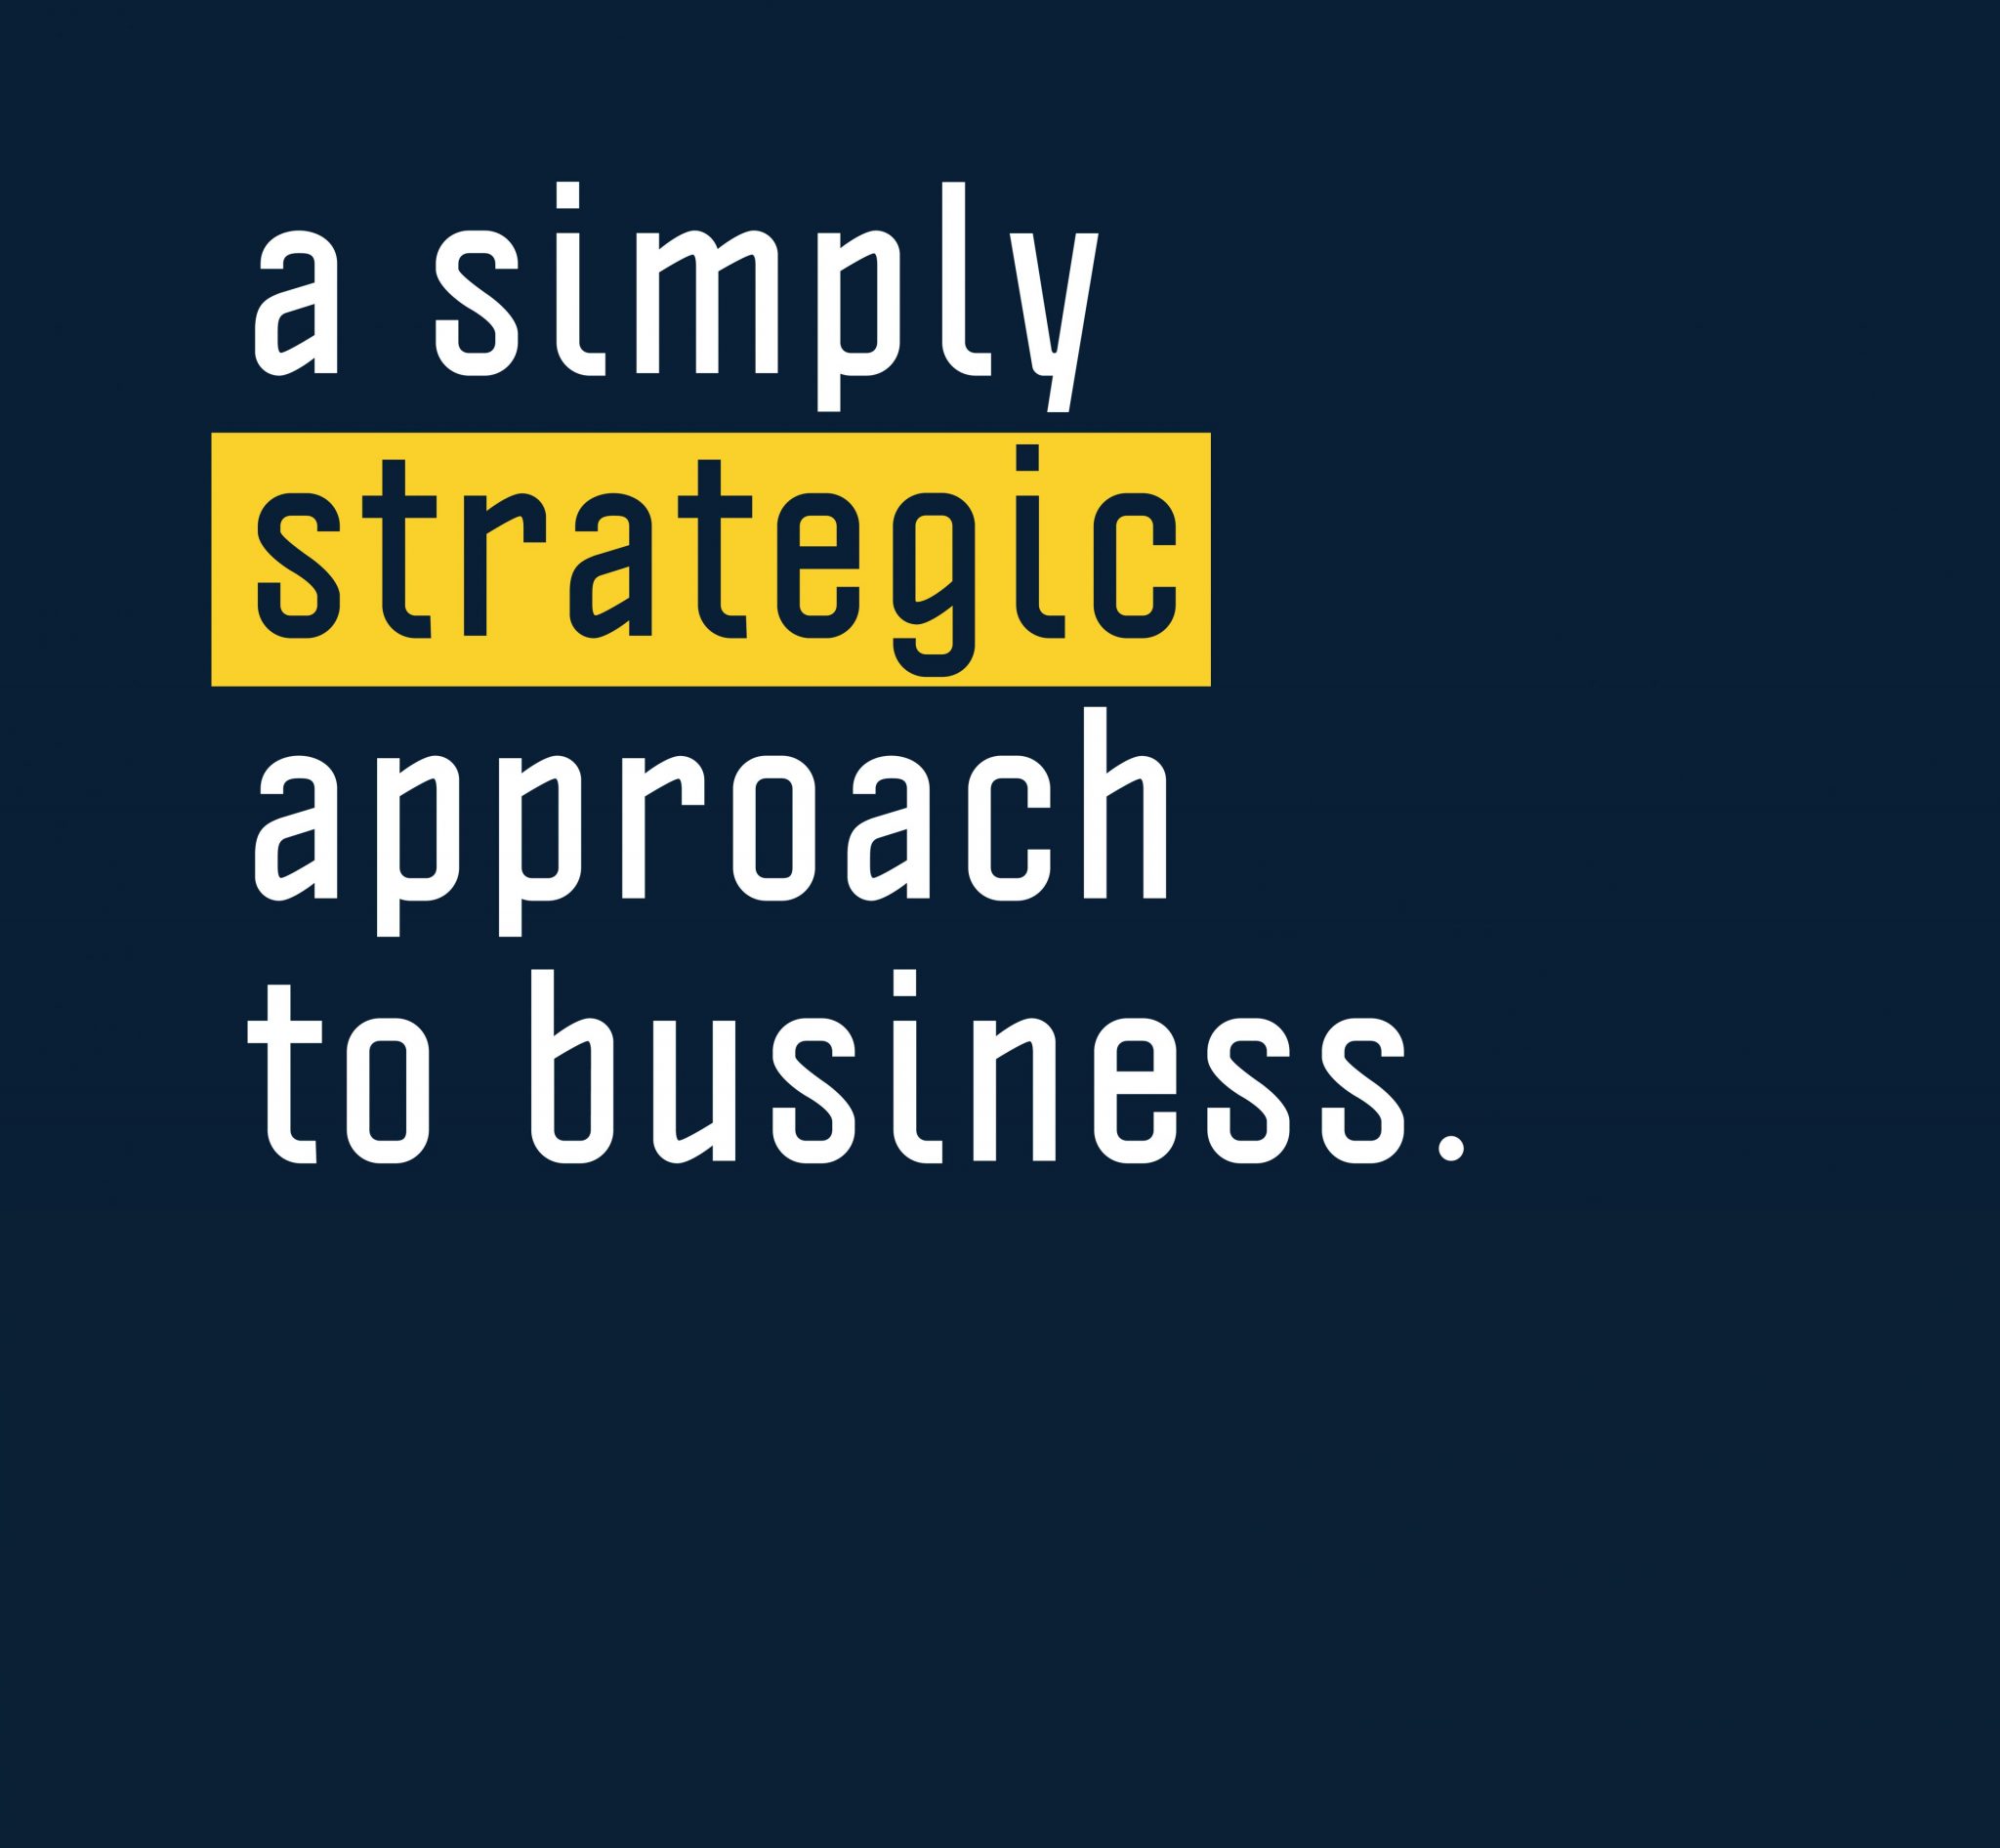 positioning strategy statement - a simply strategic approach to business